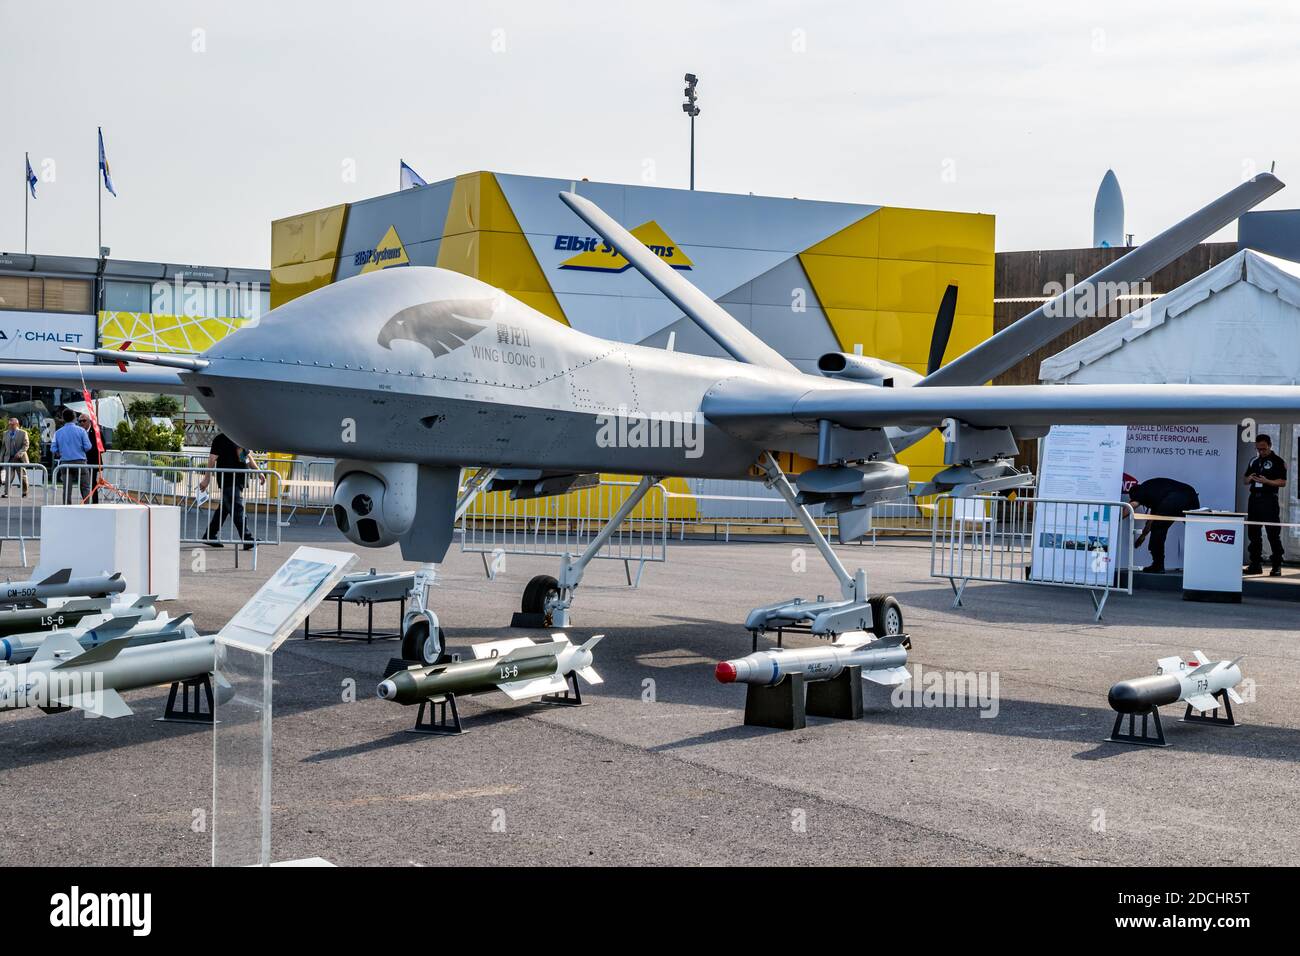 Military drone 2017 photography and images - Alamy